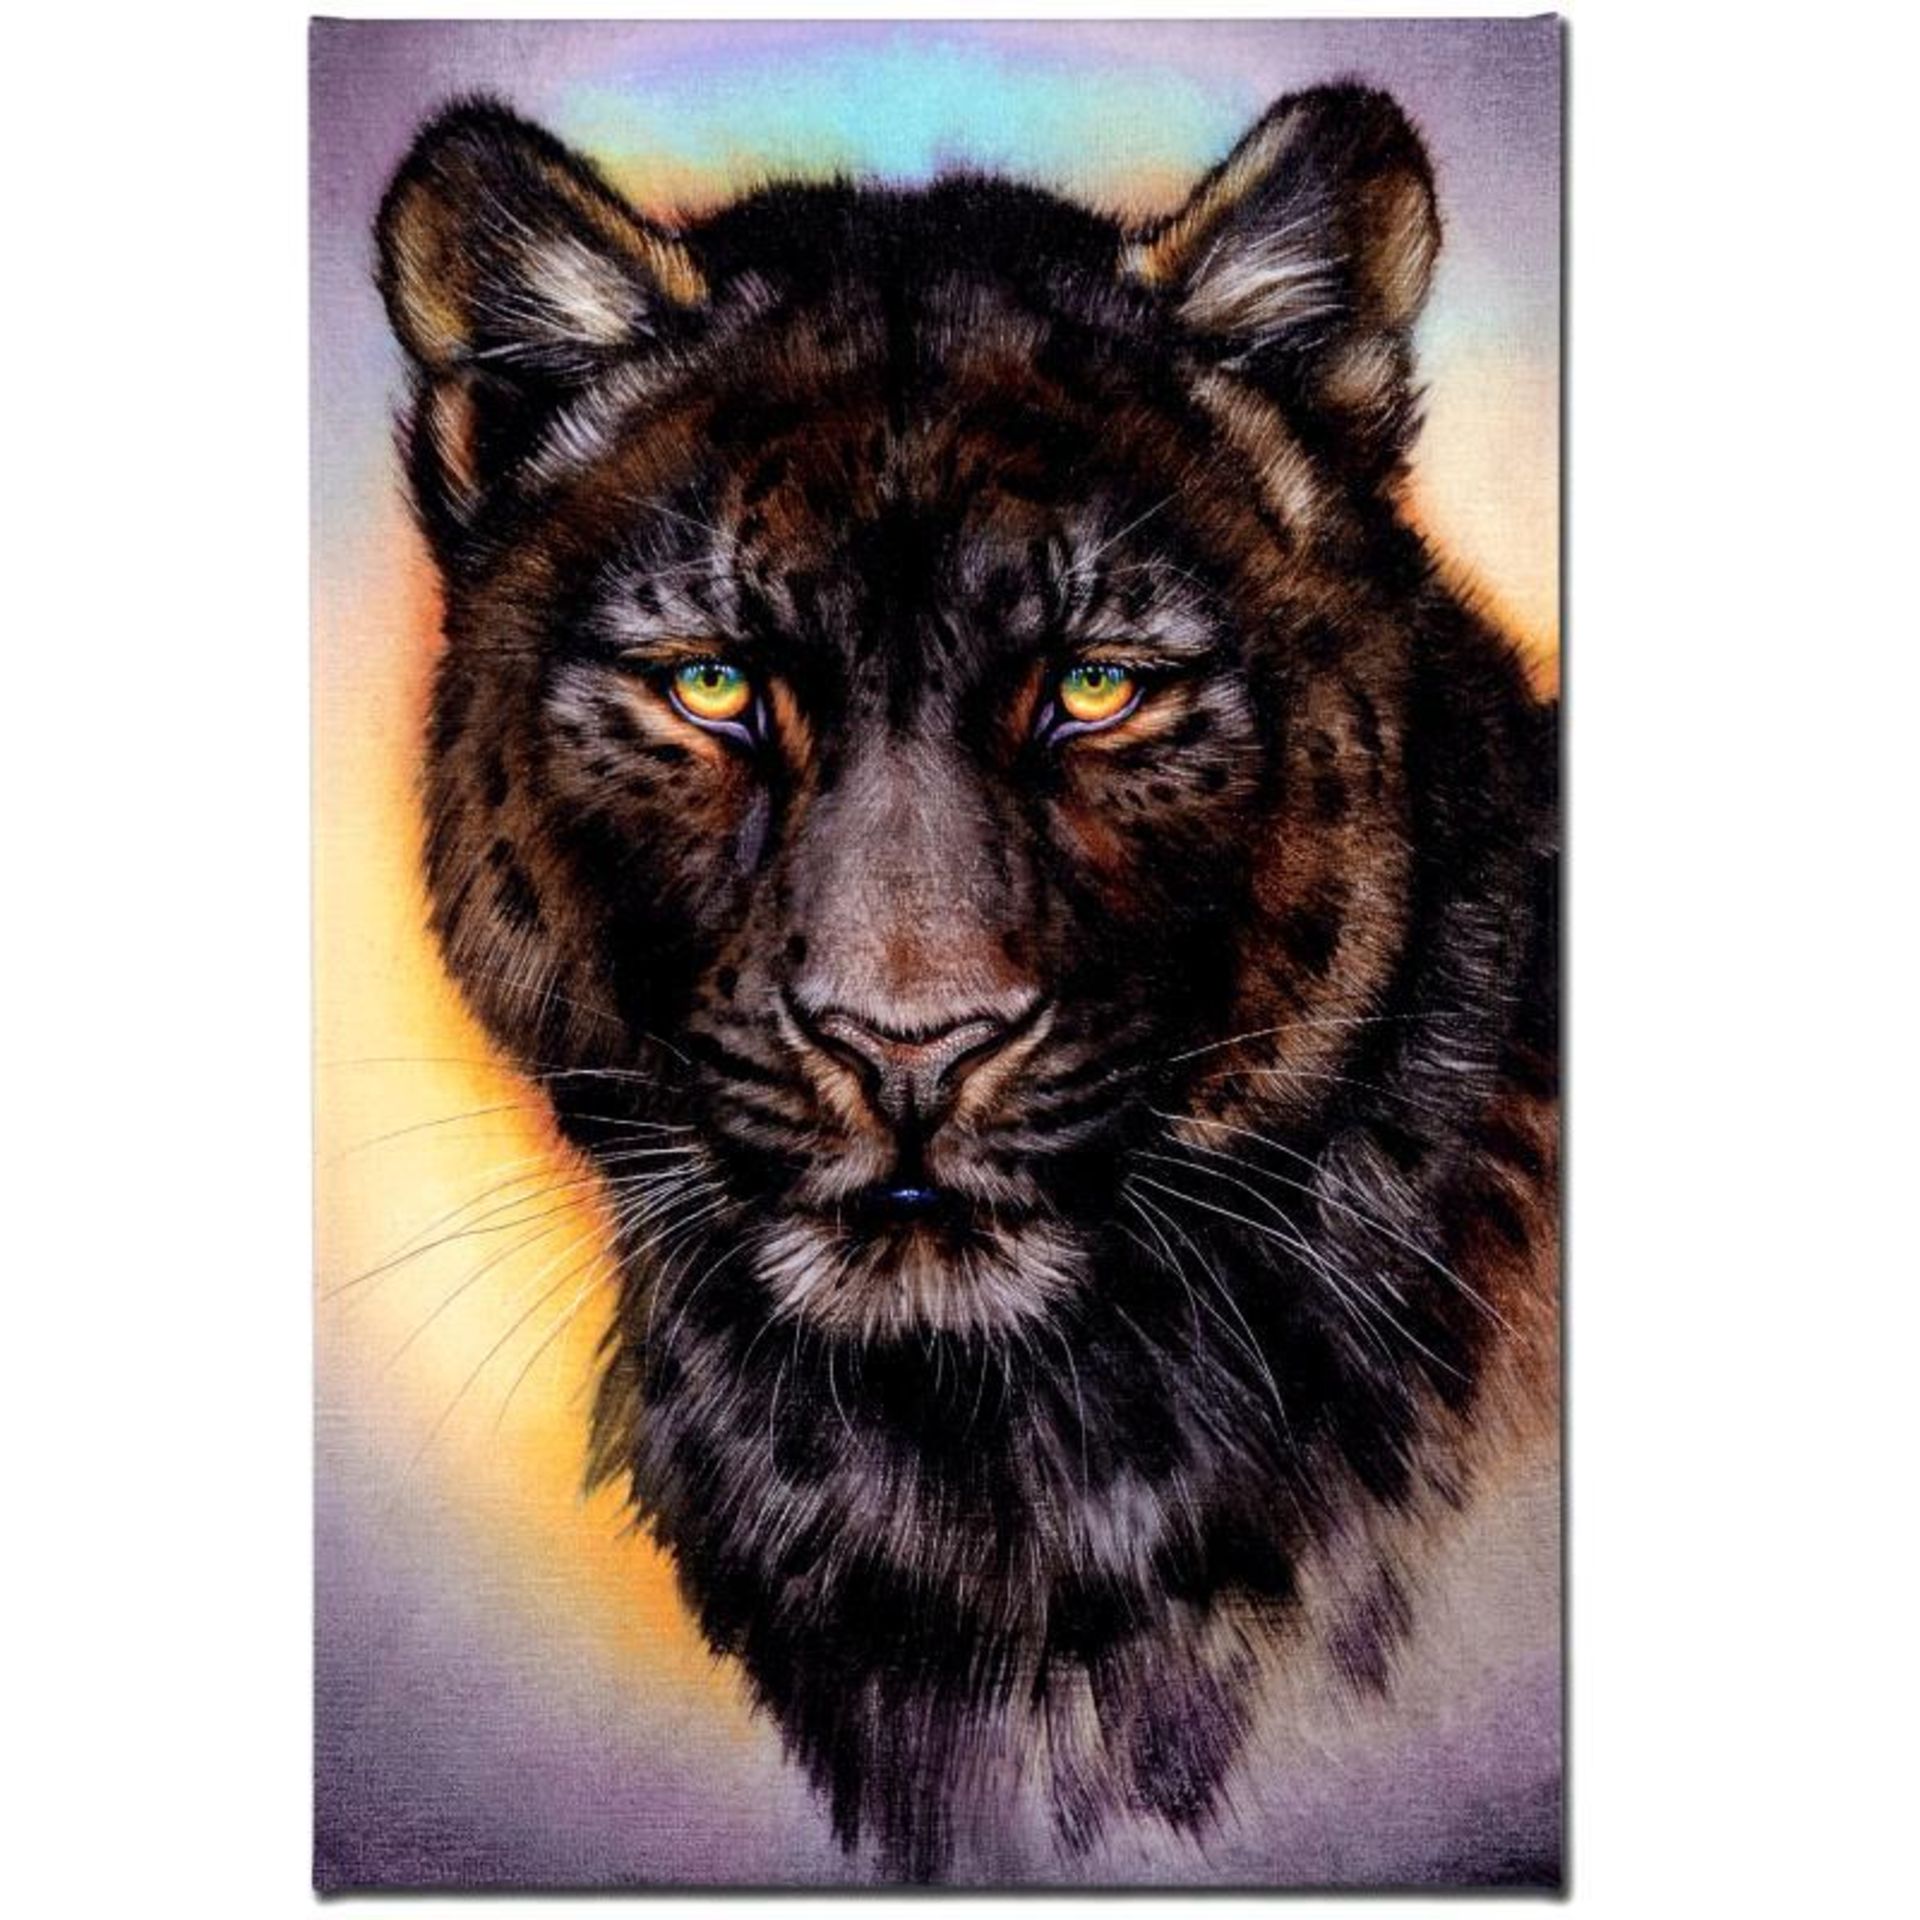 "Black Phase Leopard" Limited Edition Giclee on Canvas by Martin Katon, Numbered